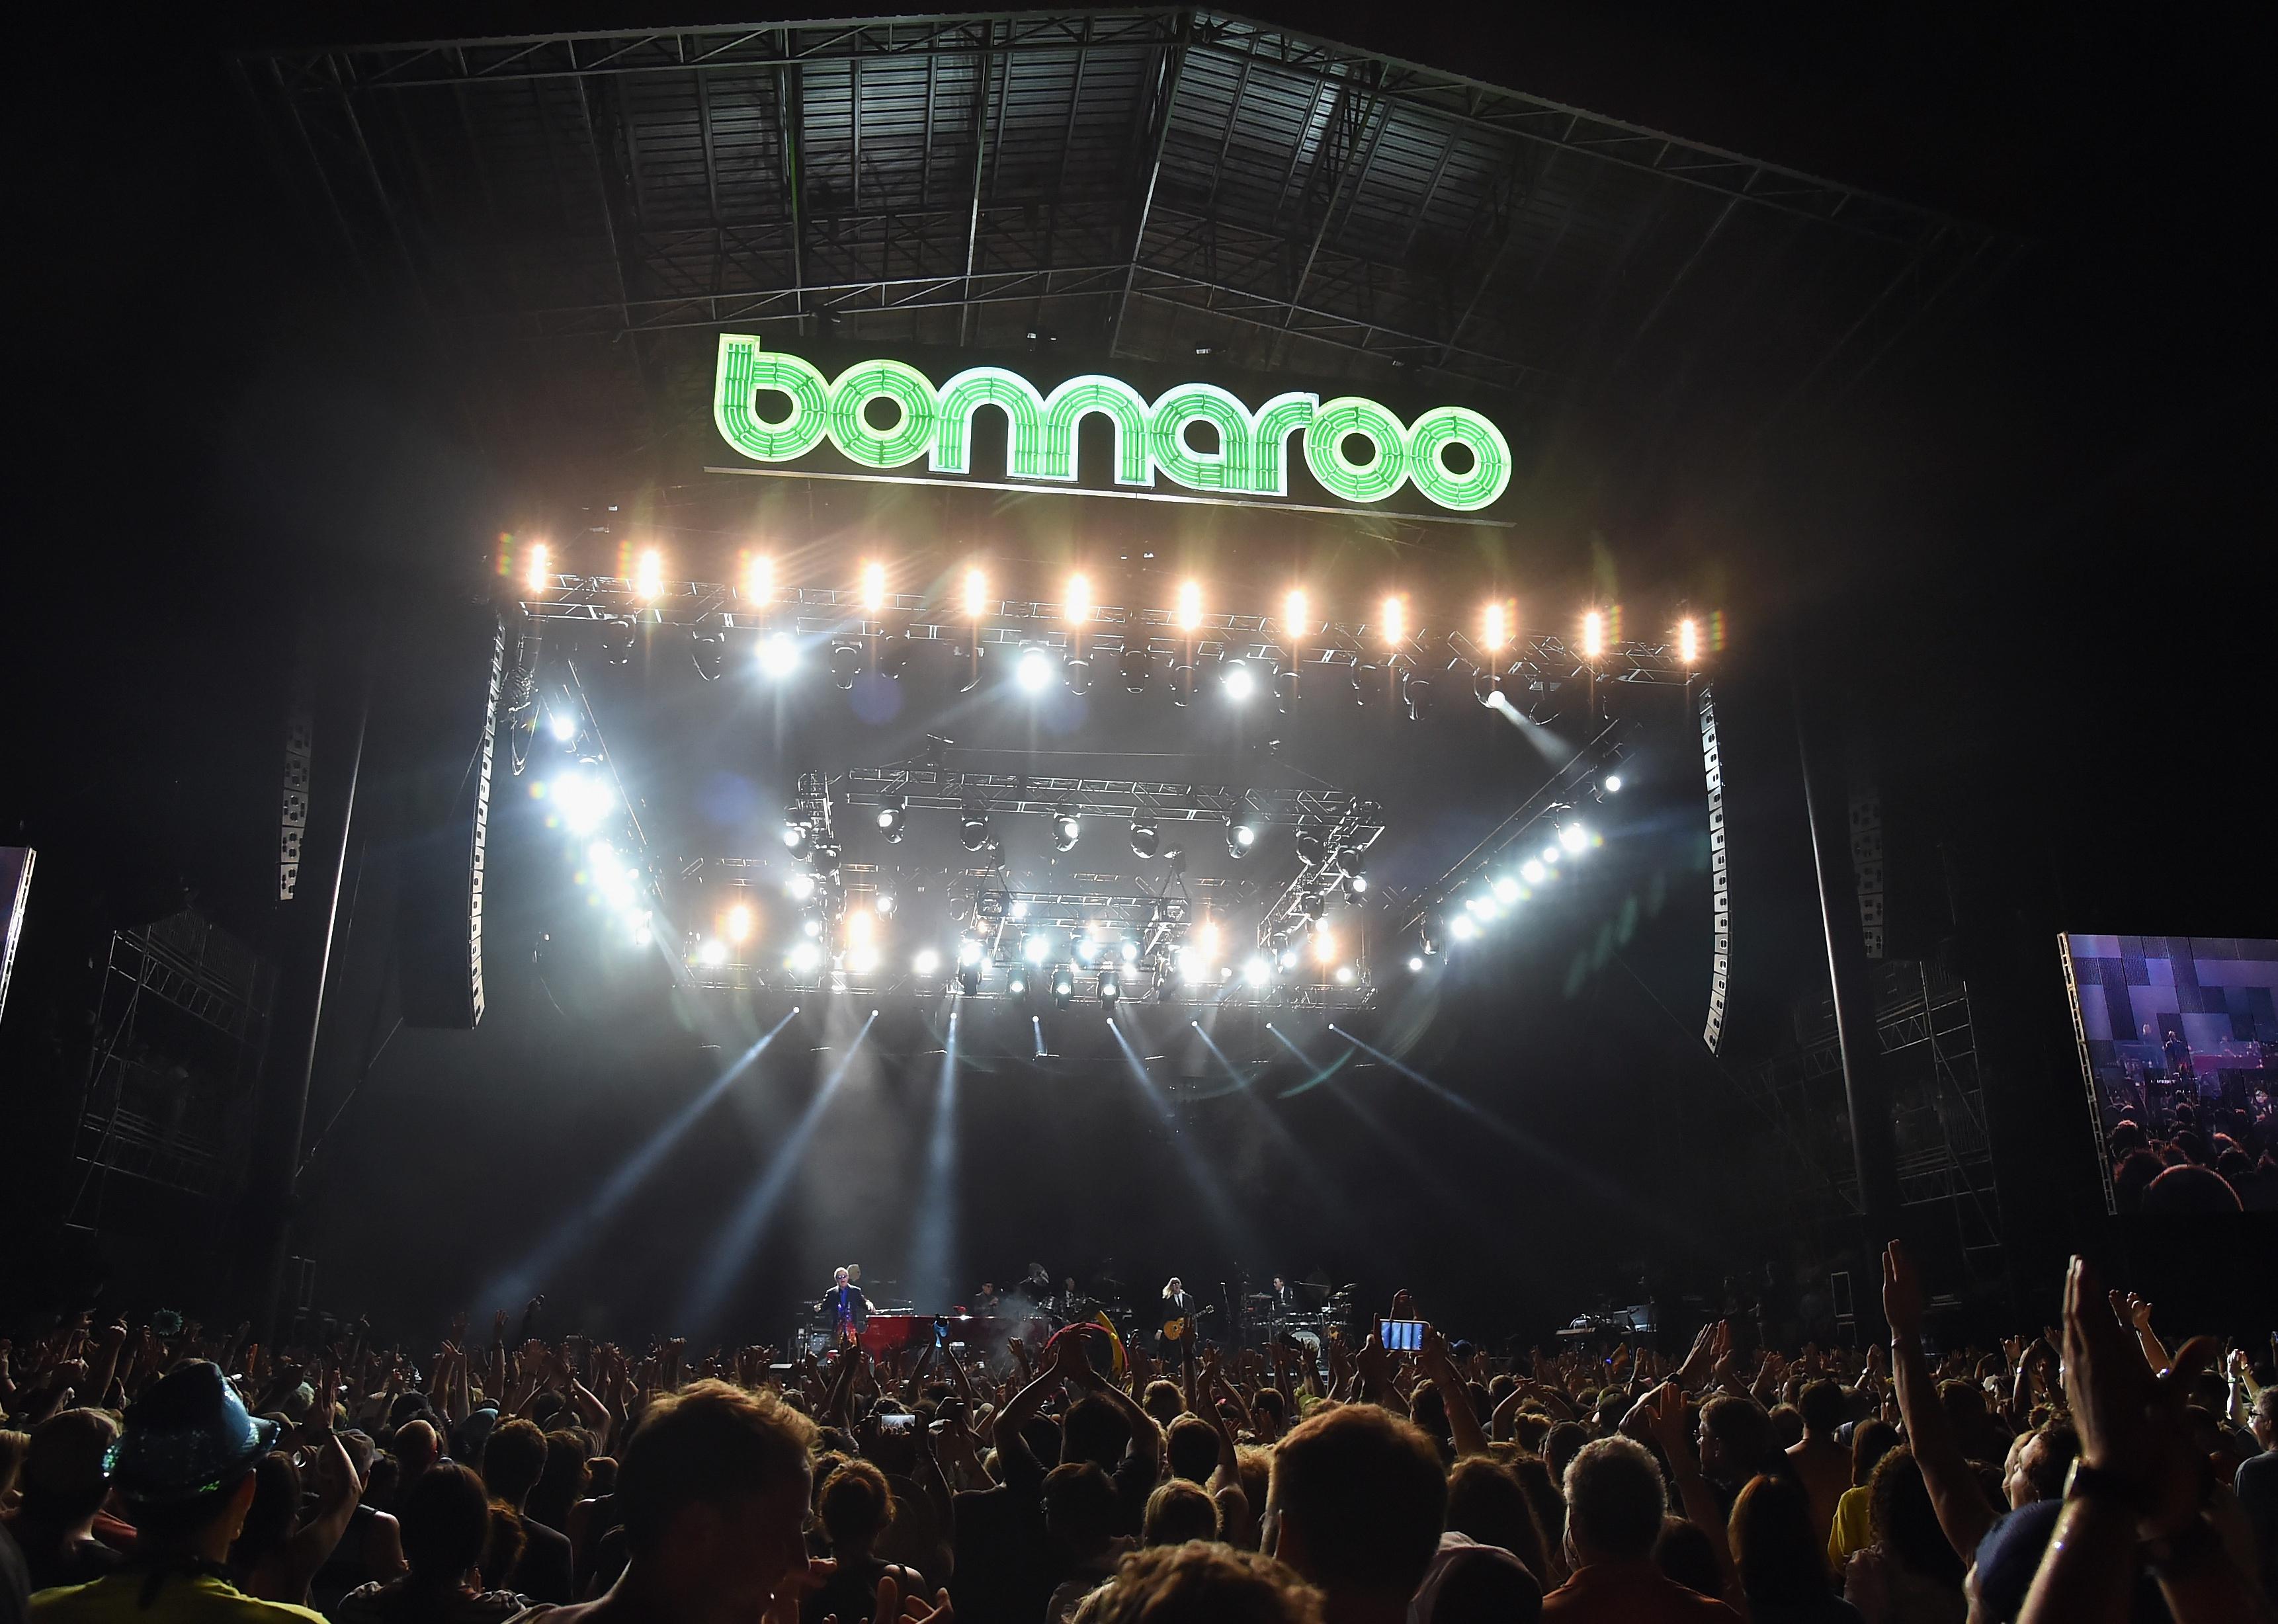 <p>Like its predecessors, the 13th Bonnaroo Music and Arts Festival delivered four days of live performances across multiple genres. Some of the major acts included Elton John, Vampire Weekend, The Avett Brothers, Phoenix, Skrillex, Arctic Monkeys, The Flaming Lips, Jack White, Lionel Richie, and Kanye West.</p> <p><strong>You may also like:</strong> <a href="https://stacker.com/music/taylor-swifts-eras-tour-has-defined-2023s-zeitgeist-here-are-some-staggering-stats-behind">Taylor Swift's 'Eras Tour' has defined 2023's zeitgeist—here are some staggering stats behind the most successful tour/film combo in music history</a></p>